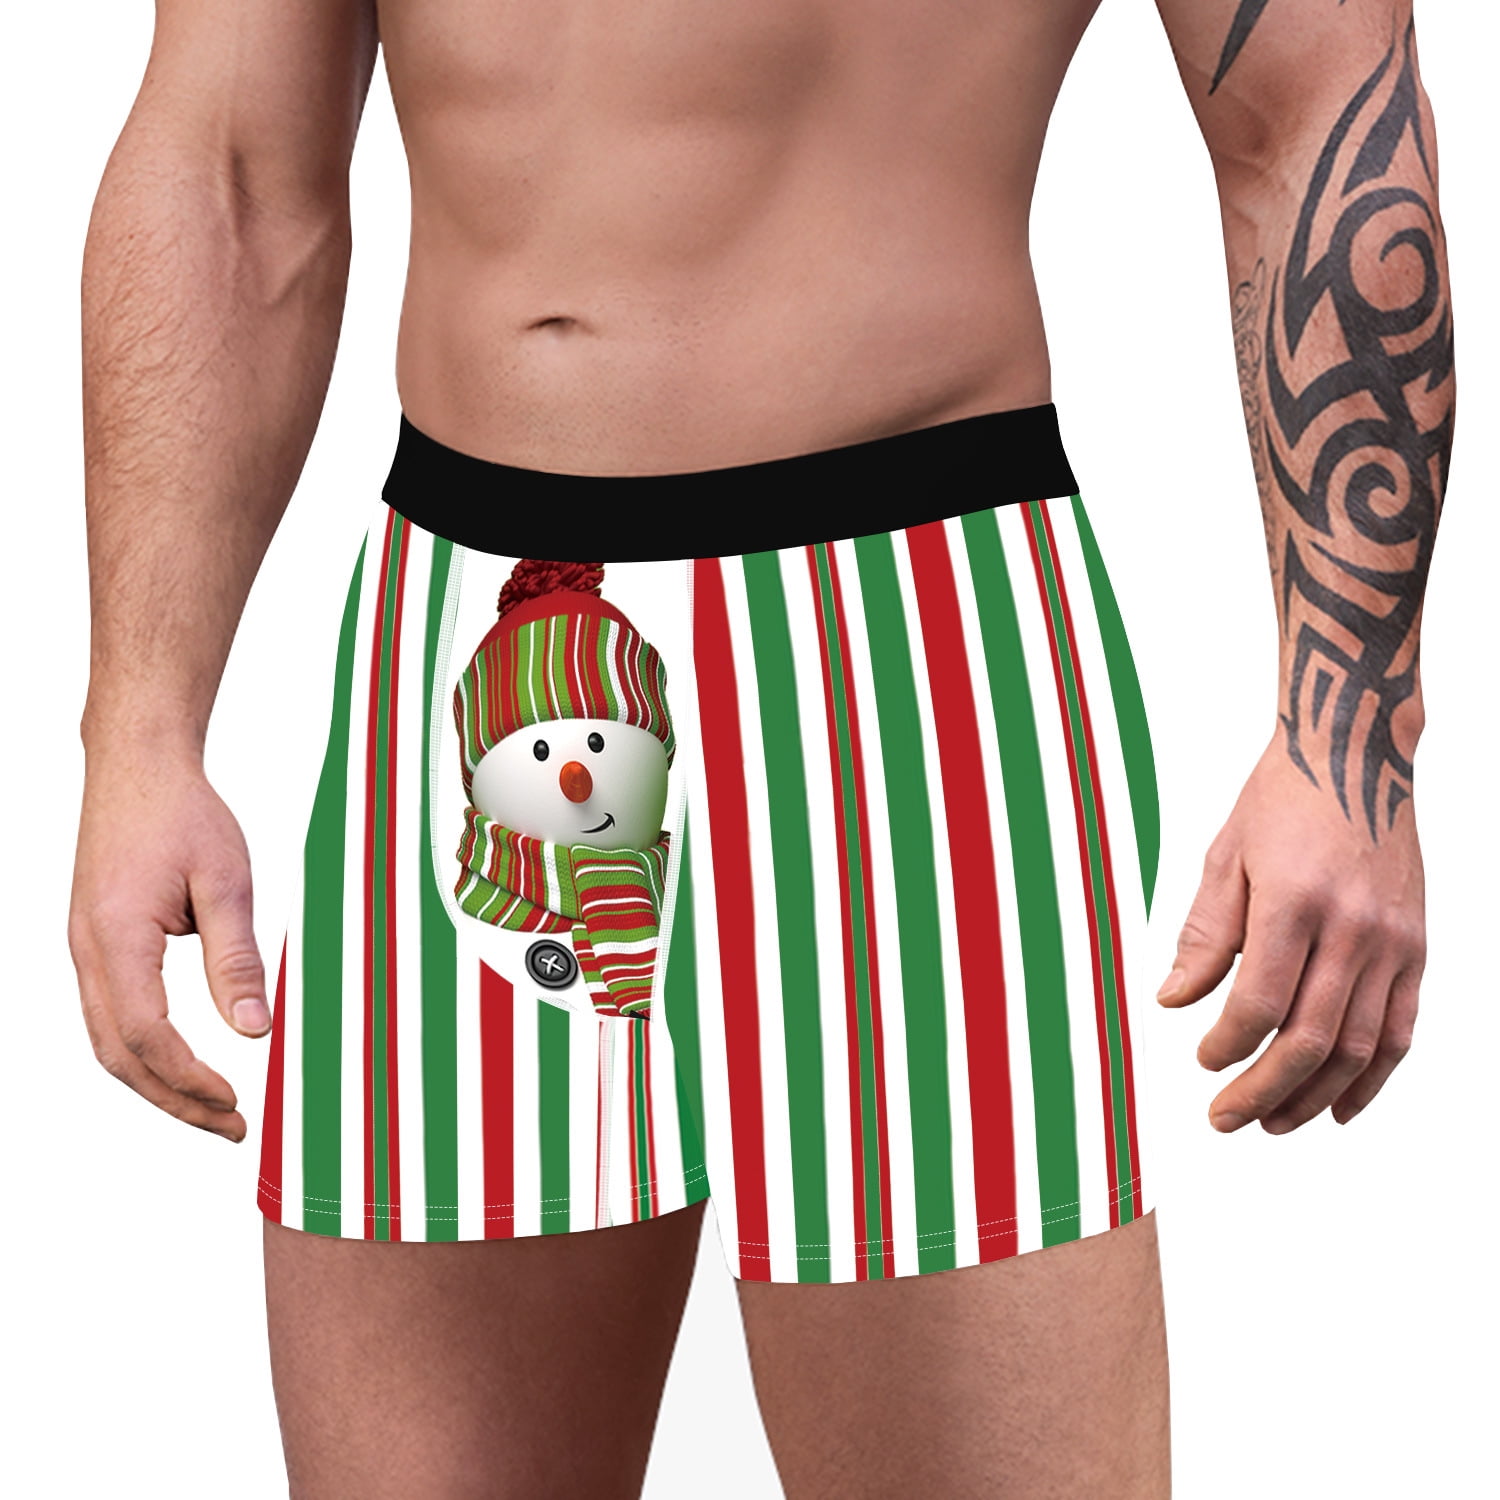 Boxer Briefs for Men Pack Cartoon Pattern Celebrate Holiday Boxer Brief ...